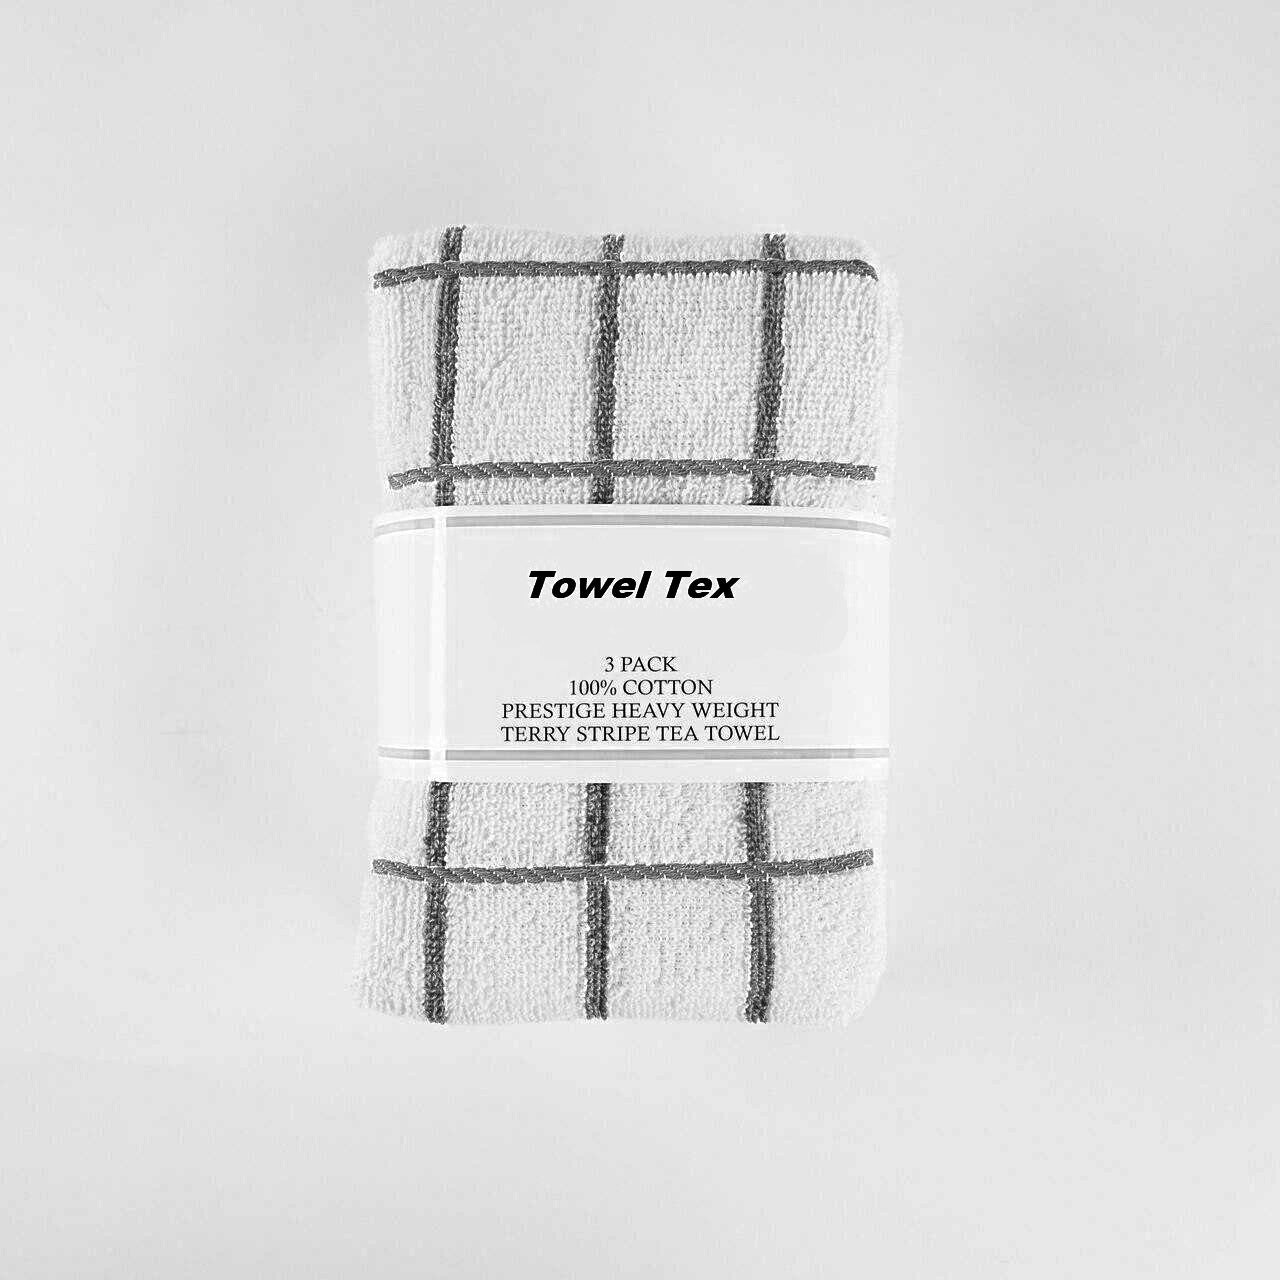 Get Your Hands on the Softest Tea Towels: 100% Cotton Terry Toweling Big Check